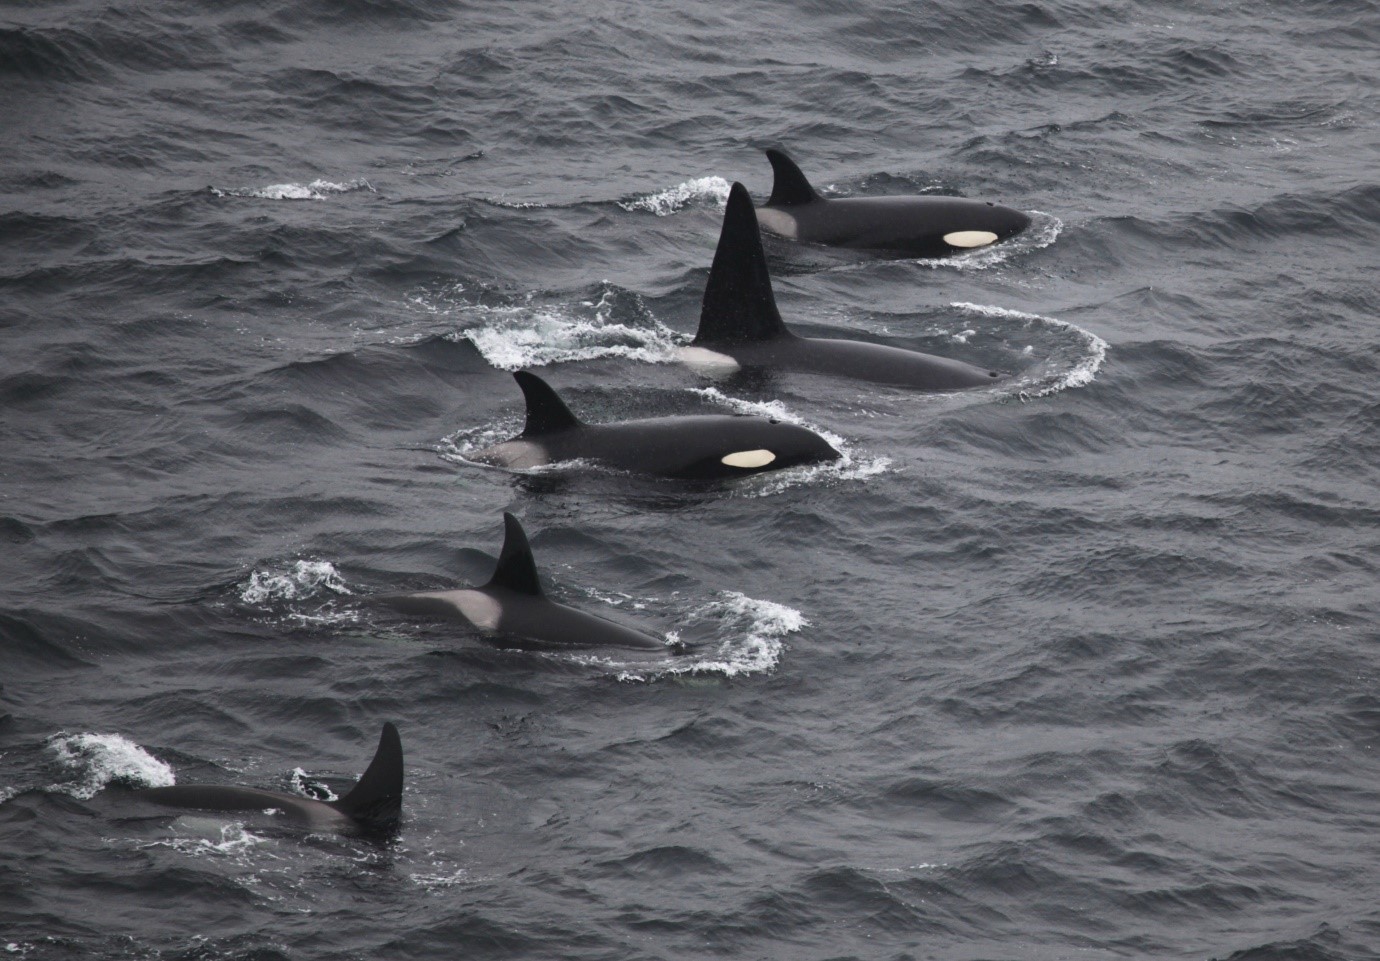 Killer whales photographed from the land during Orca Watch. Photo by Colin Bird/ Sea Watch Foundation